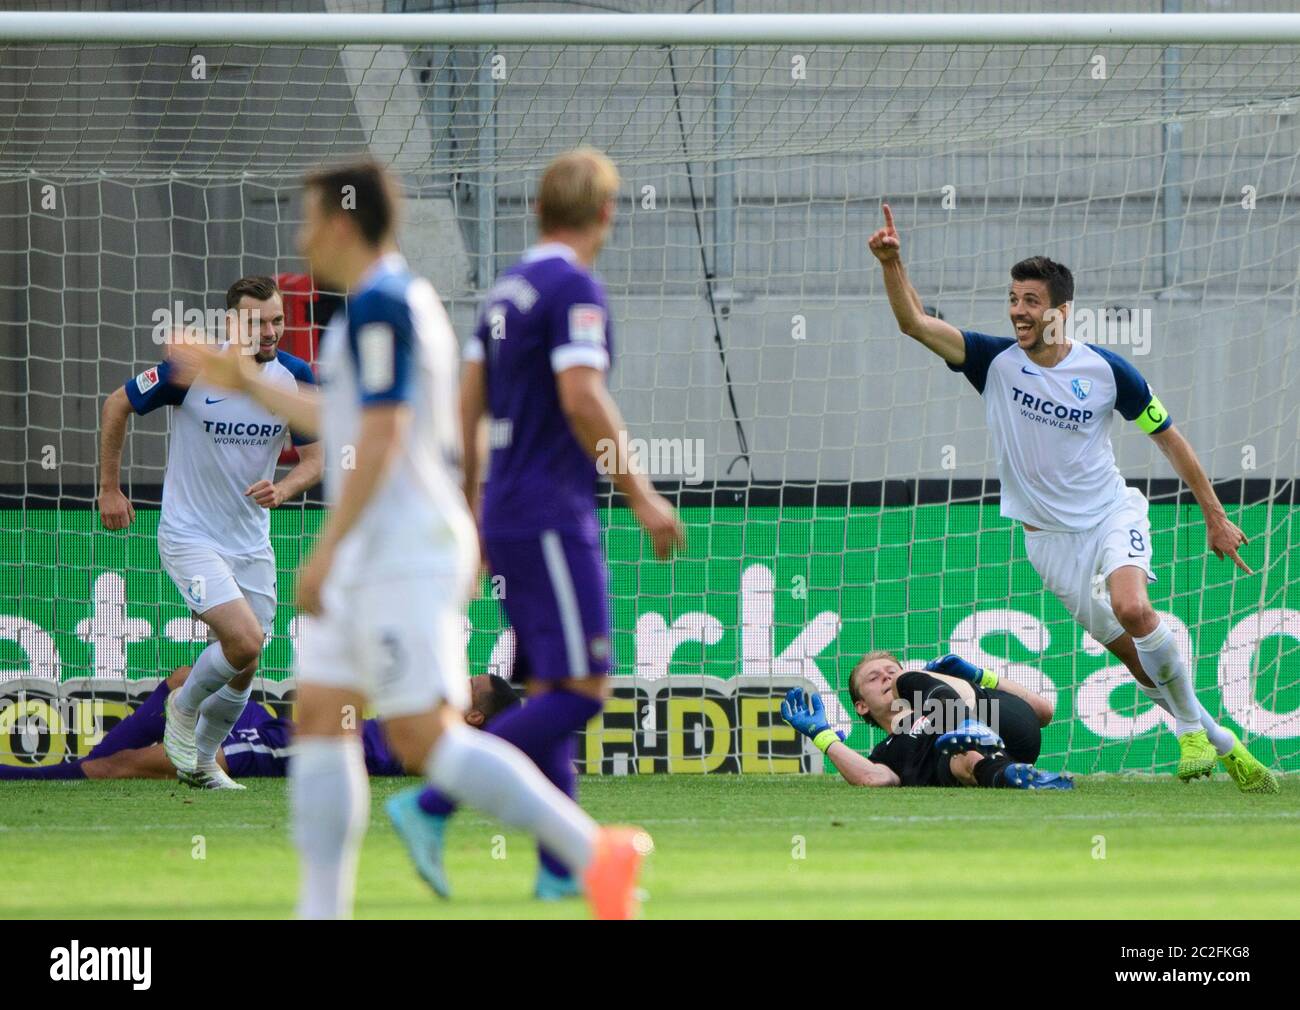 17 June 2020, Saxony, Aue: Football: 2nd Bundesliga, FC Erzgebirge Aue - VfL Bochum, 32nd matchday, at the Sparkassen-Erzgebirgsstadion. Bochum's Anthony Losilla (r) cheers after his goal for 0:2, Aue's goalkeeper Robert Jendrusch is on the ground. Photo: Robert Michael/dpa-Zentralbild/dpa - IMPORTANT NOTE: In accordance with the regulations of the DFL Deutsche Fußball Liga and the DFB Deutscher Fußball-Bund, it is prohibited to exploit or have exploited in the stadium and/or from the game taken photographs in the form of sequence images and/or video-like photo series. Stock Photo